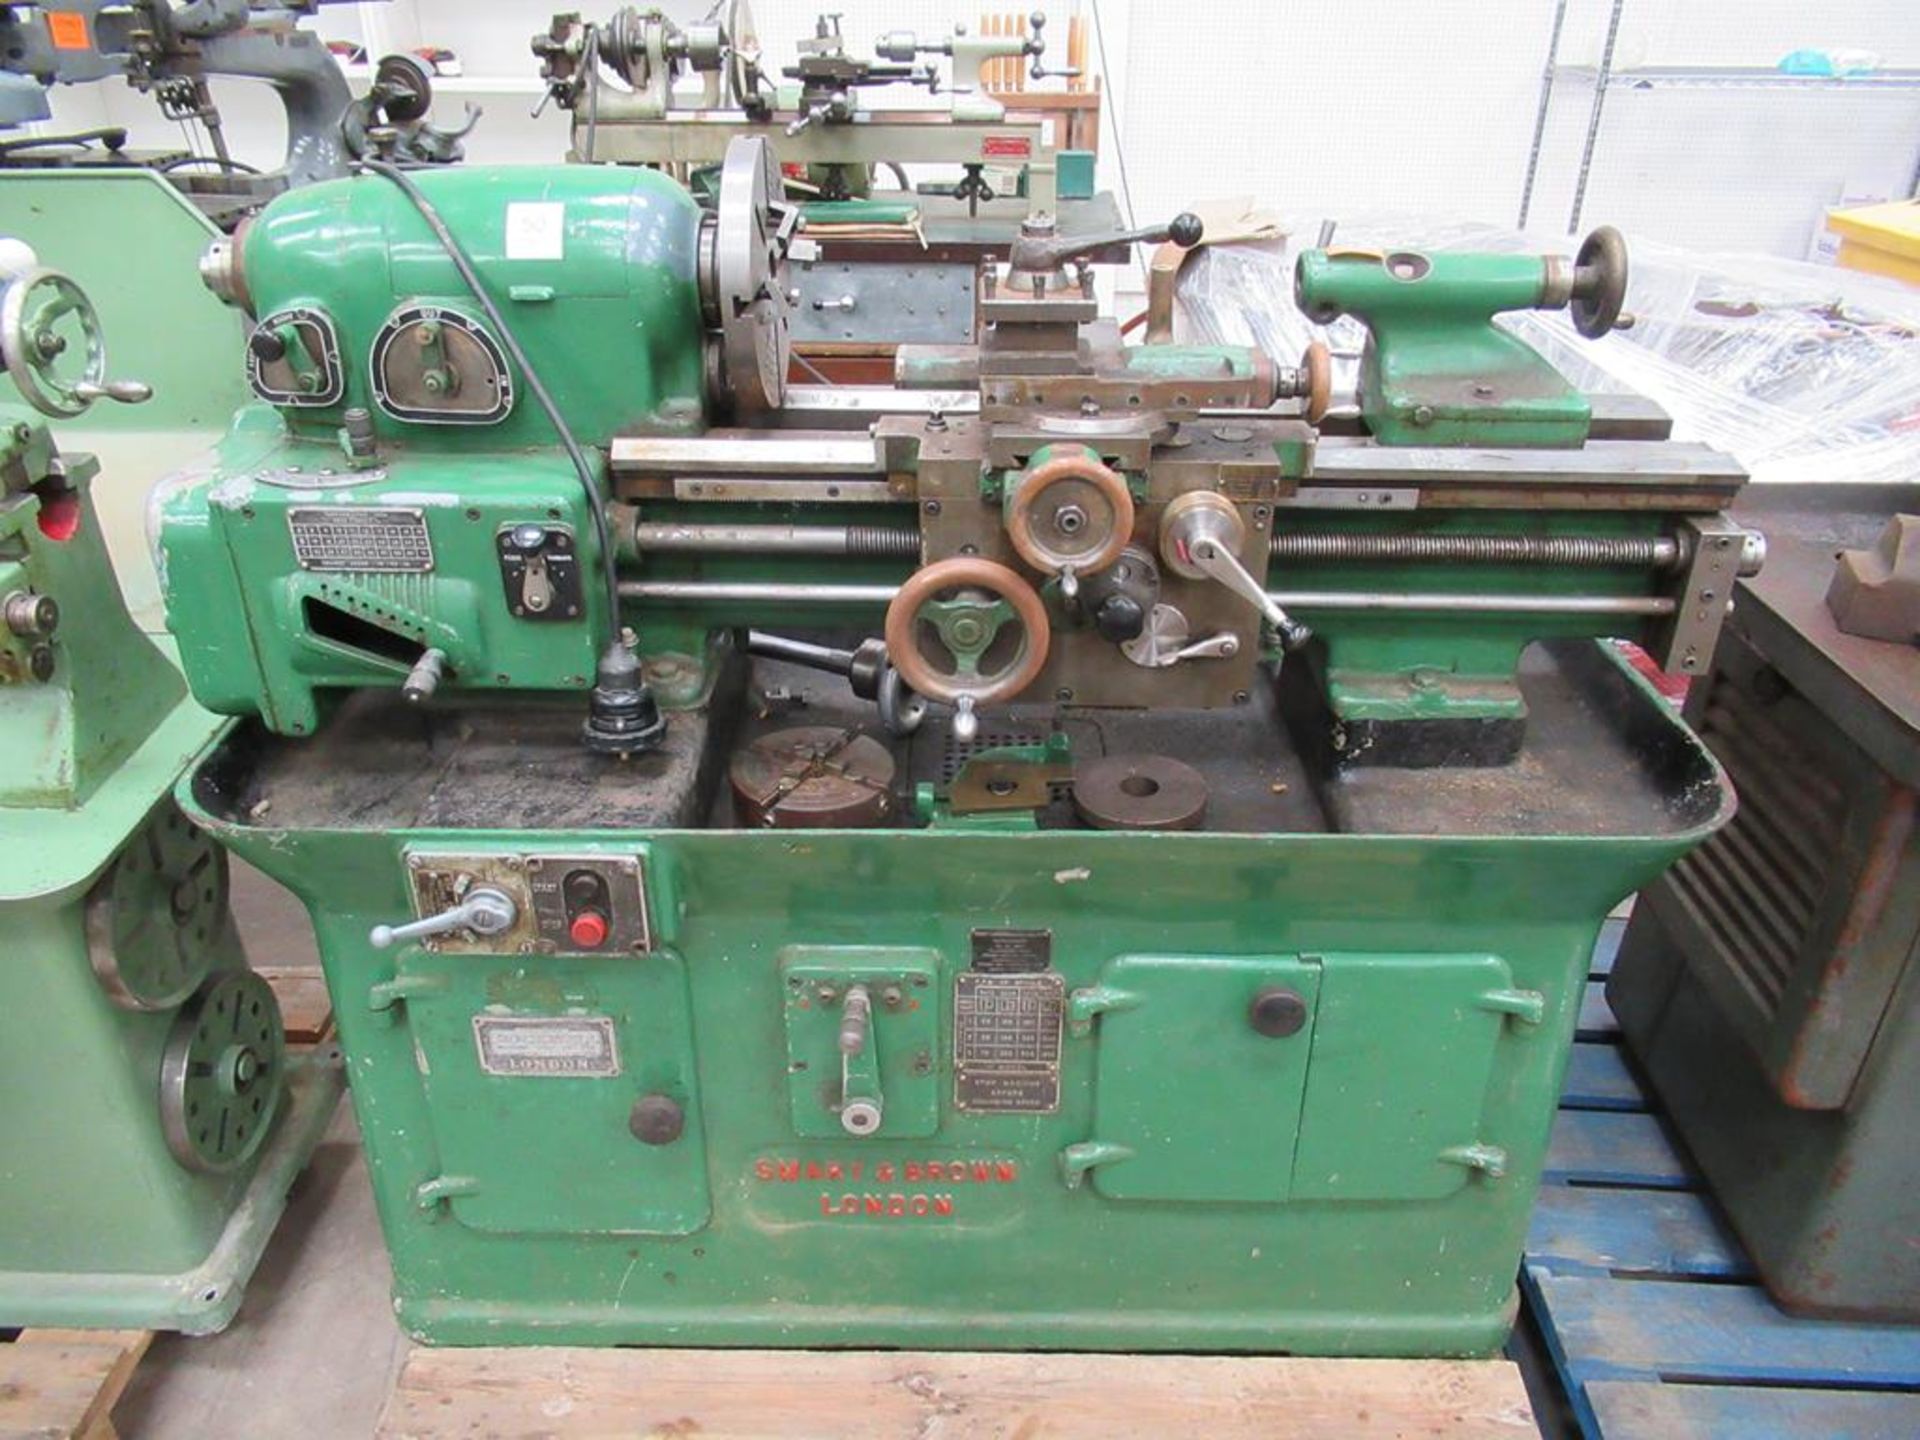 A Smart and Brown lathe